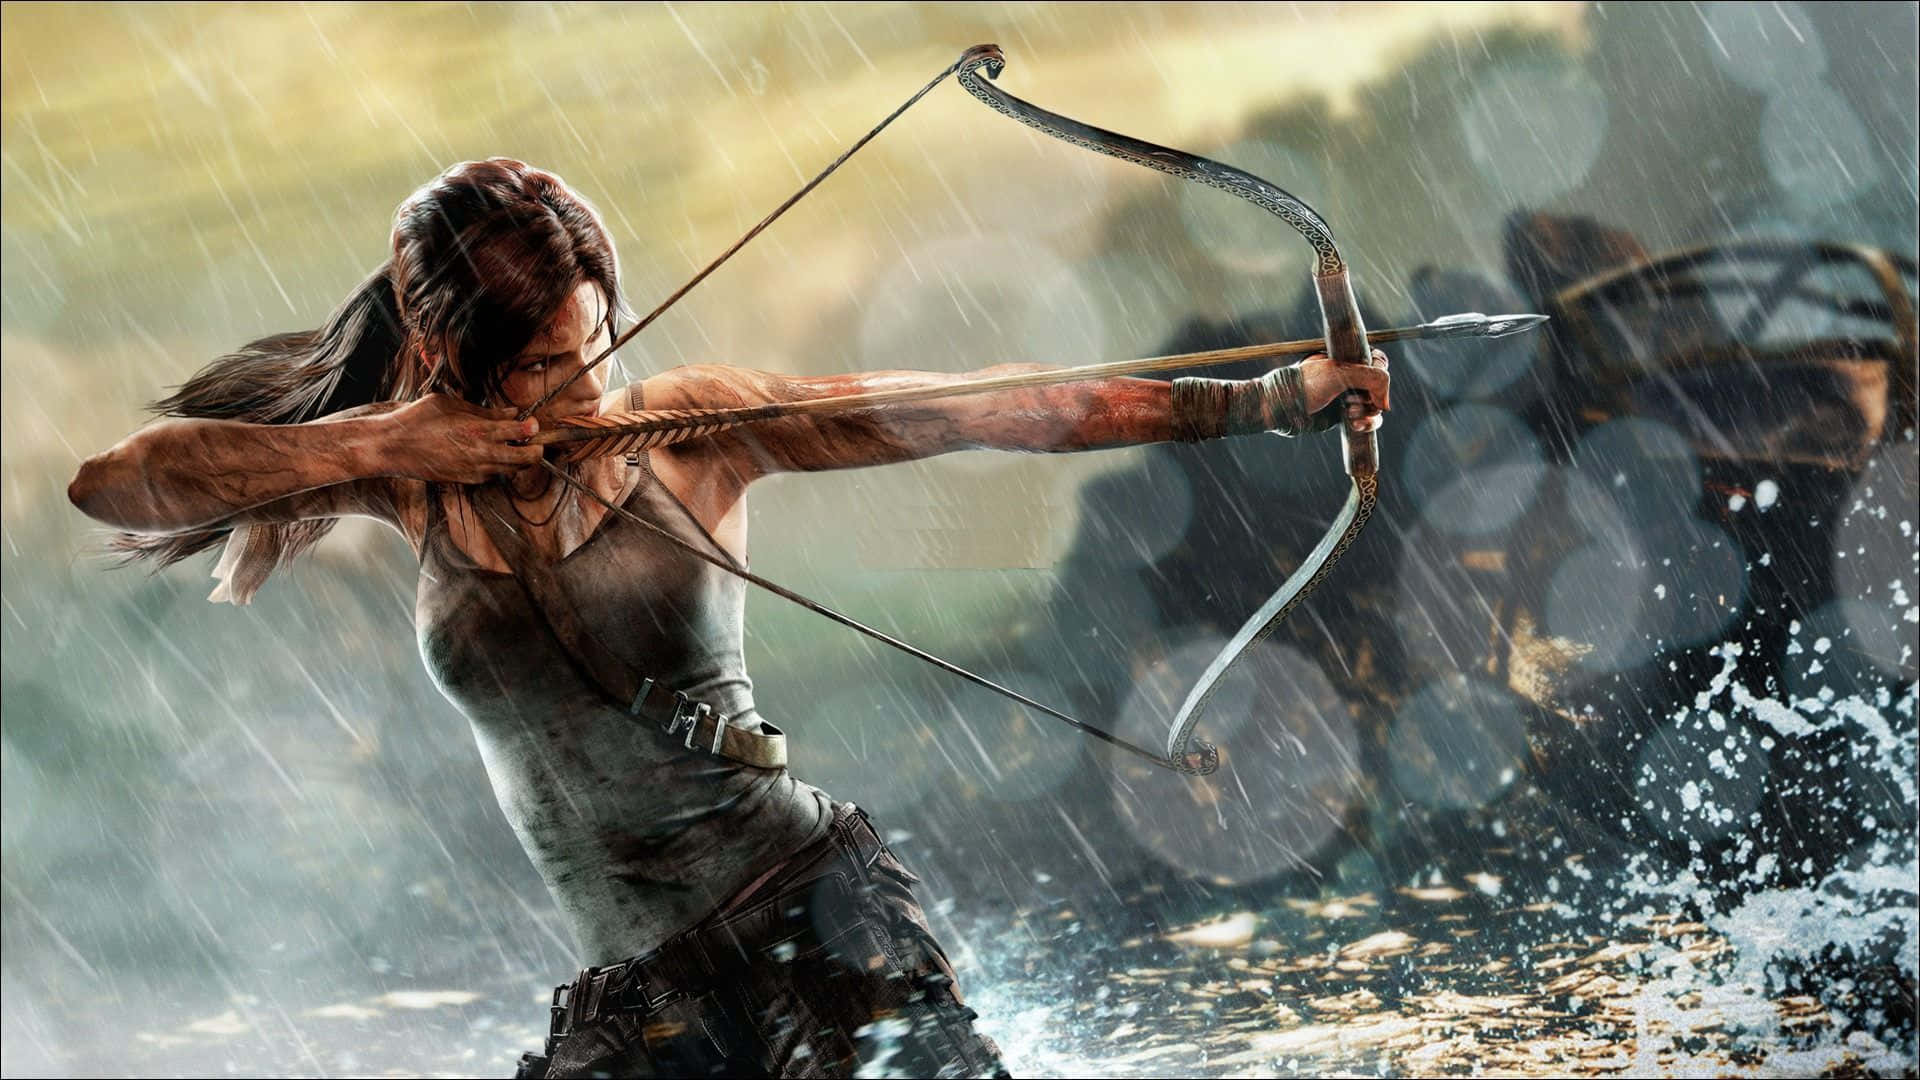 A Woman Is Aiming A Bow In The Rain Wallpaper